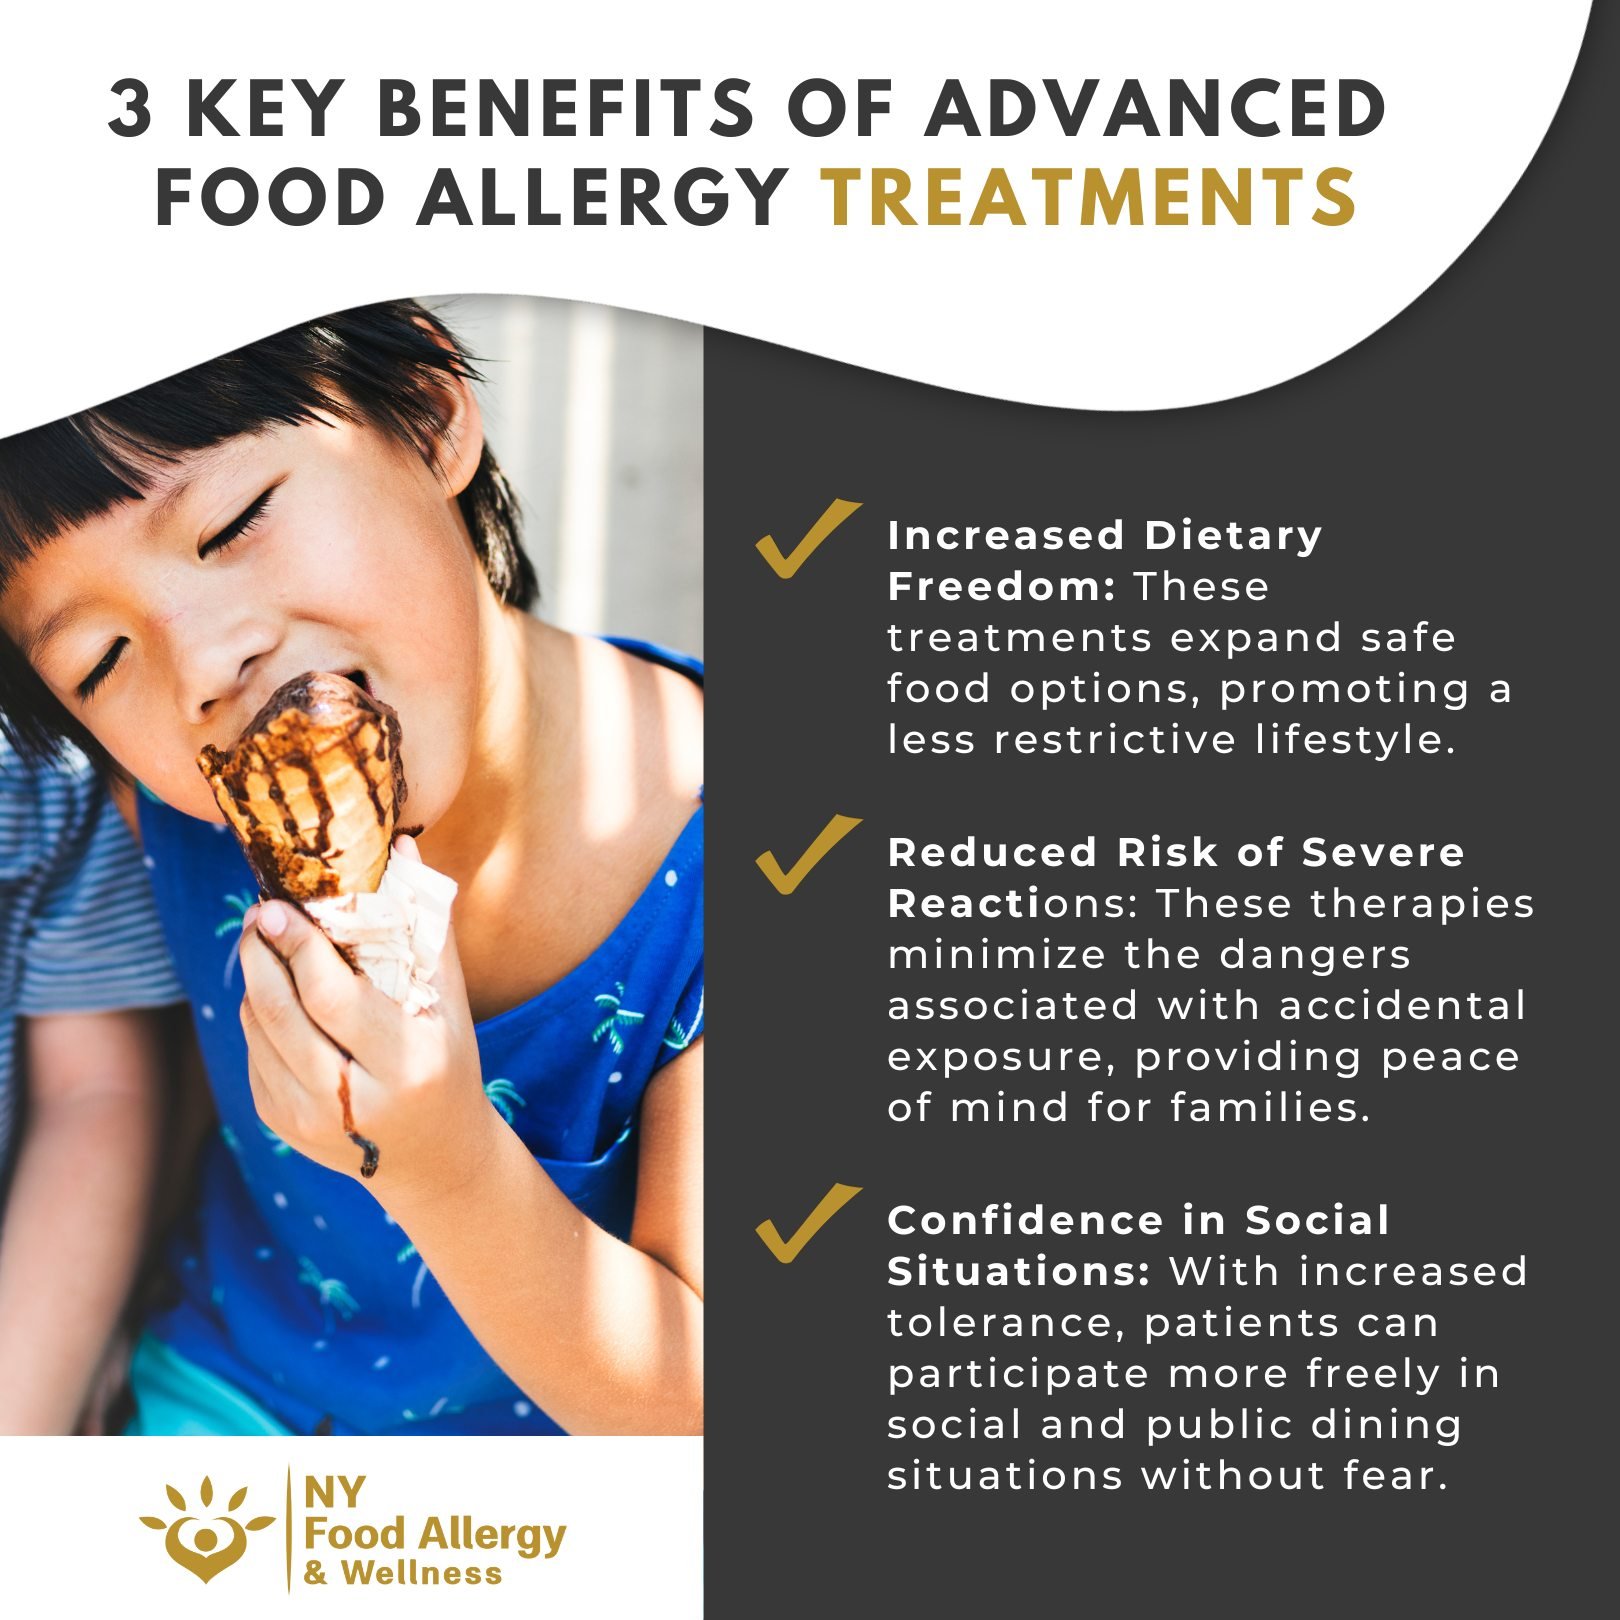 🌟 Discover how advanced food allergy treatments at NY Food Allergy &amp; Wellness can bring transformative benefits to your family:

✅ Increased Dietary Freedom: Expanding safe food options means less dietary stress and more enjoyable meals.

✅ Redu